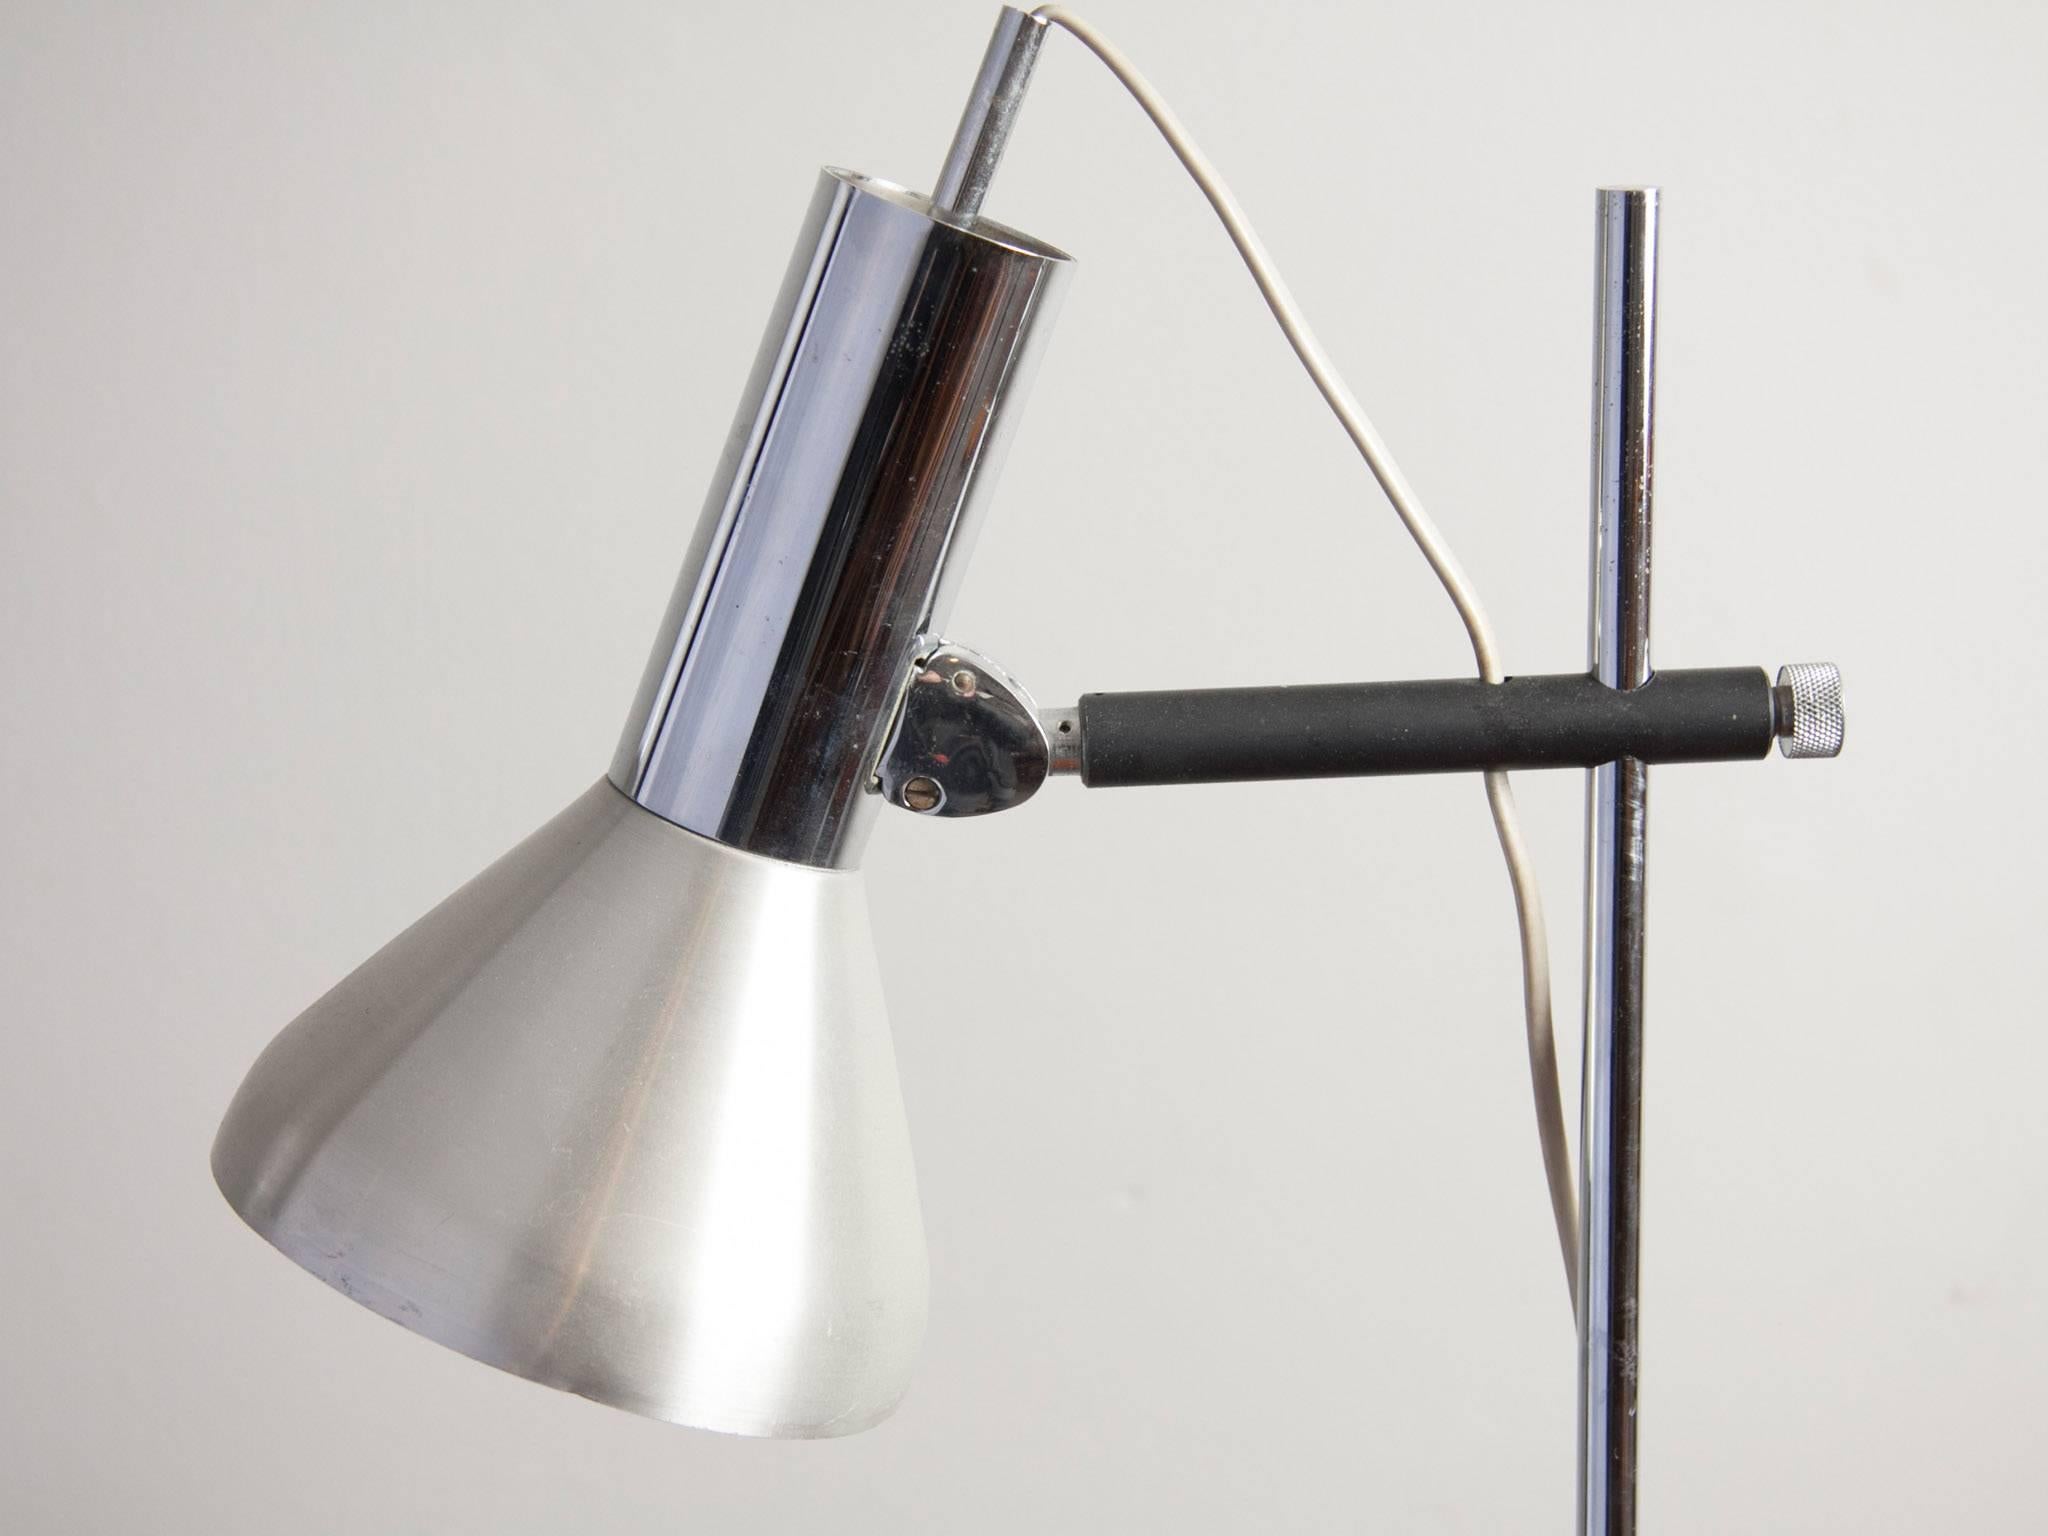 1960s French polished and brushed chrome adjustable desk lamp with a heavy cast iron contrasting base and supporting arm. The angle and height of the lamphead is adjustable to control your exact lighting requirements. The cone of the lamphead is